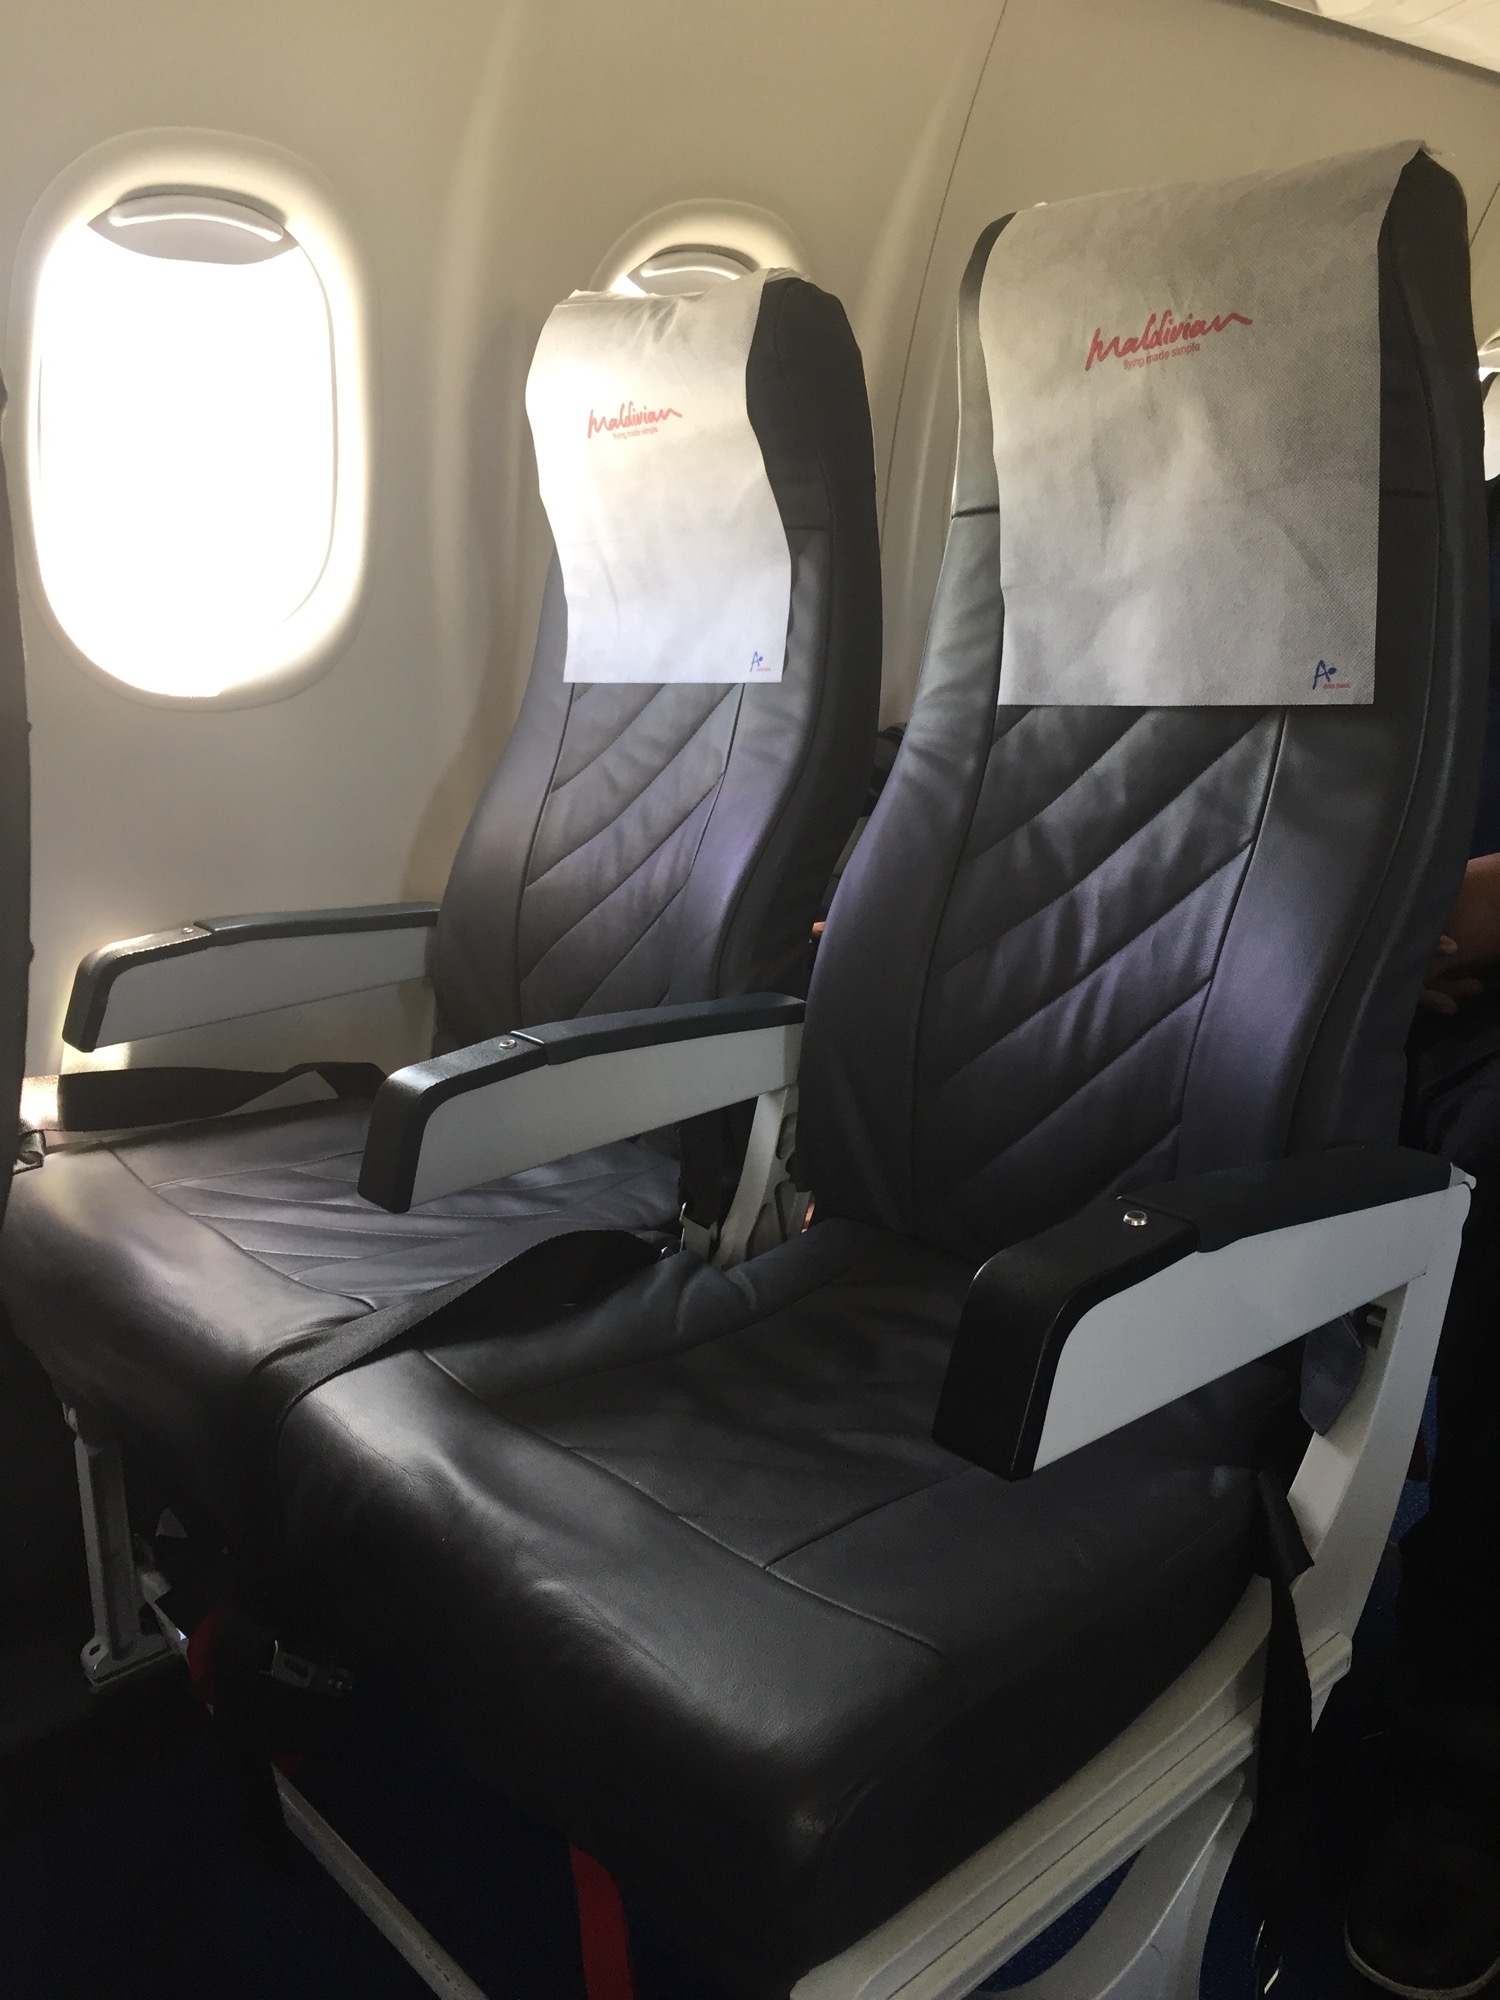 two chairs in an airplane